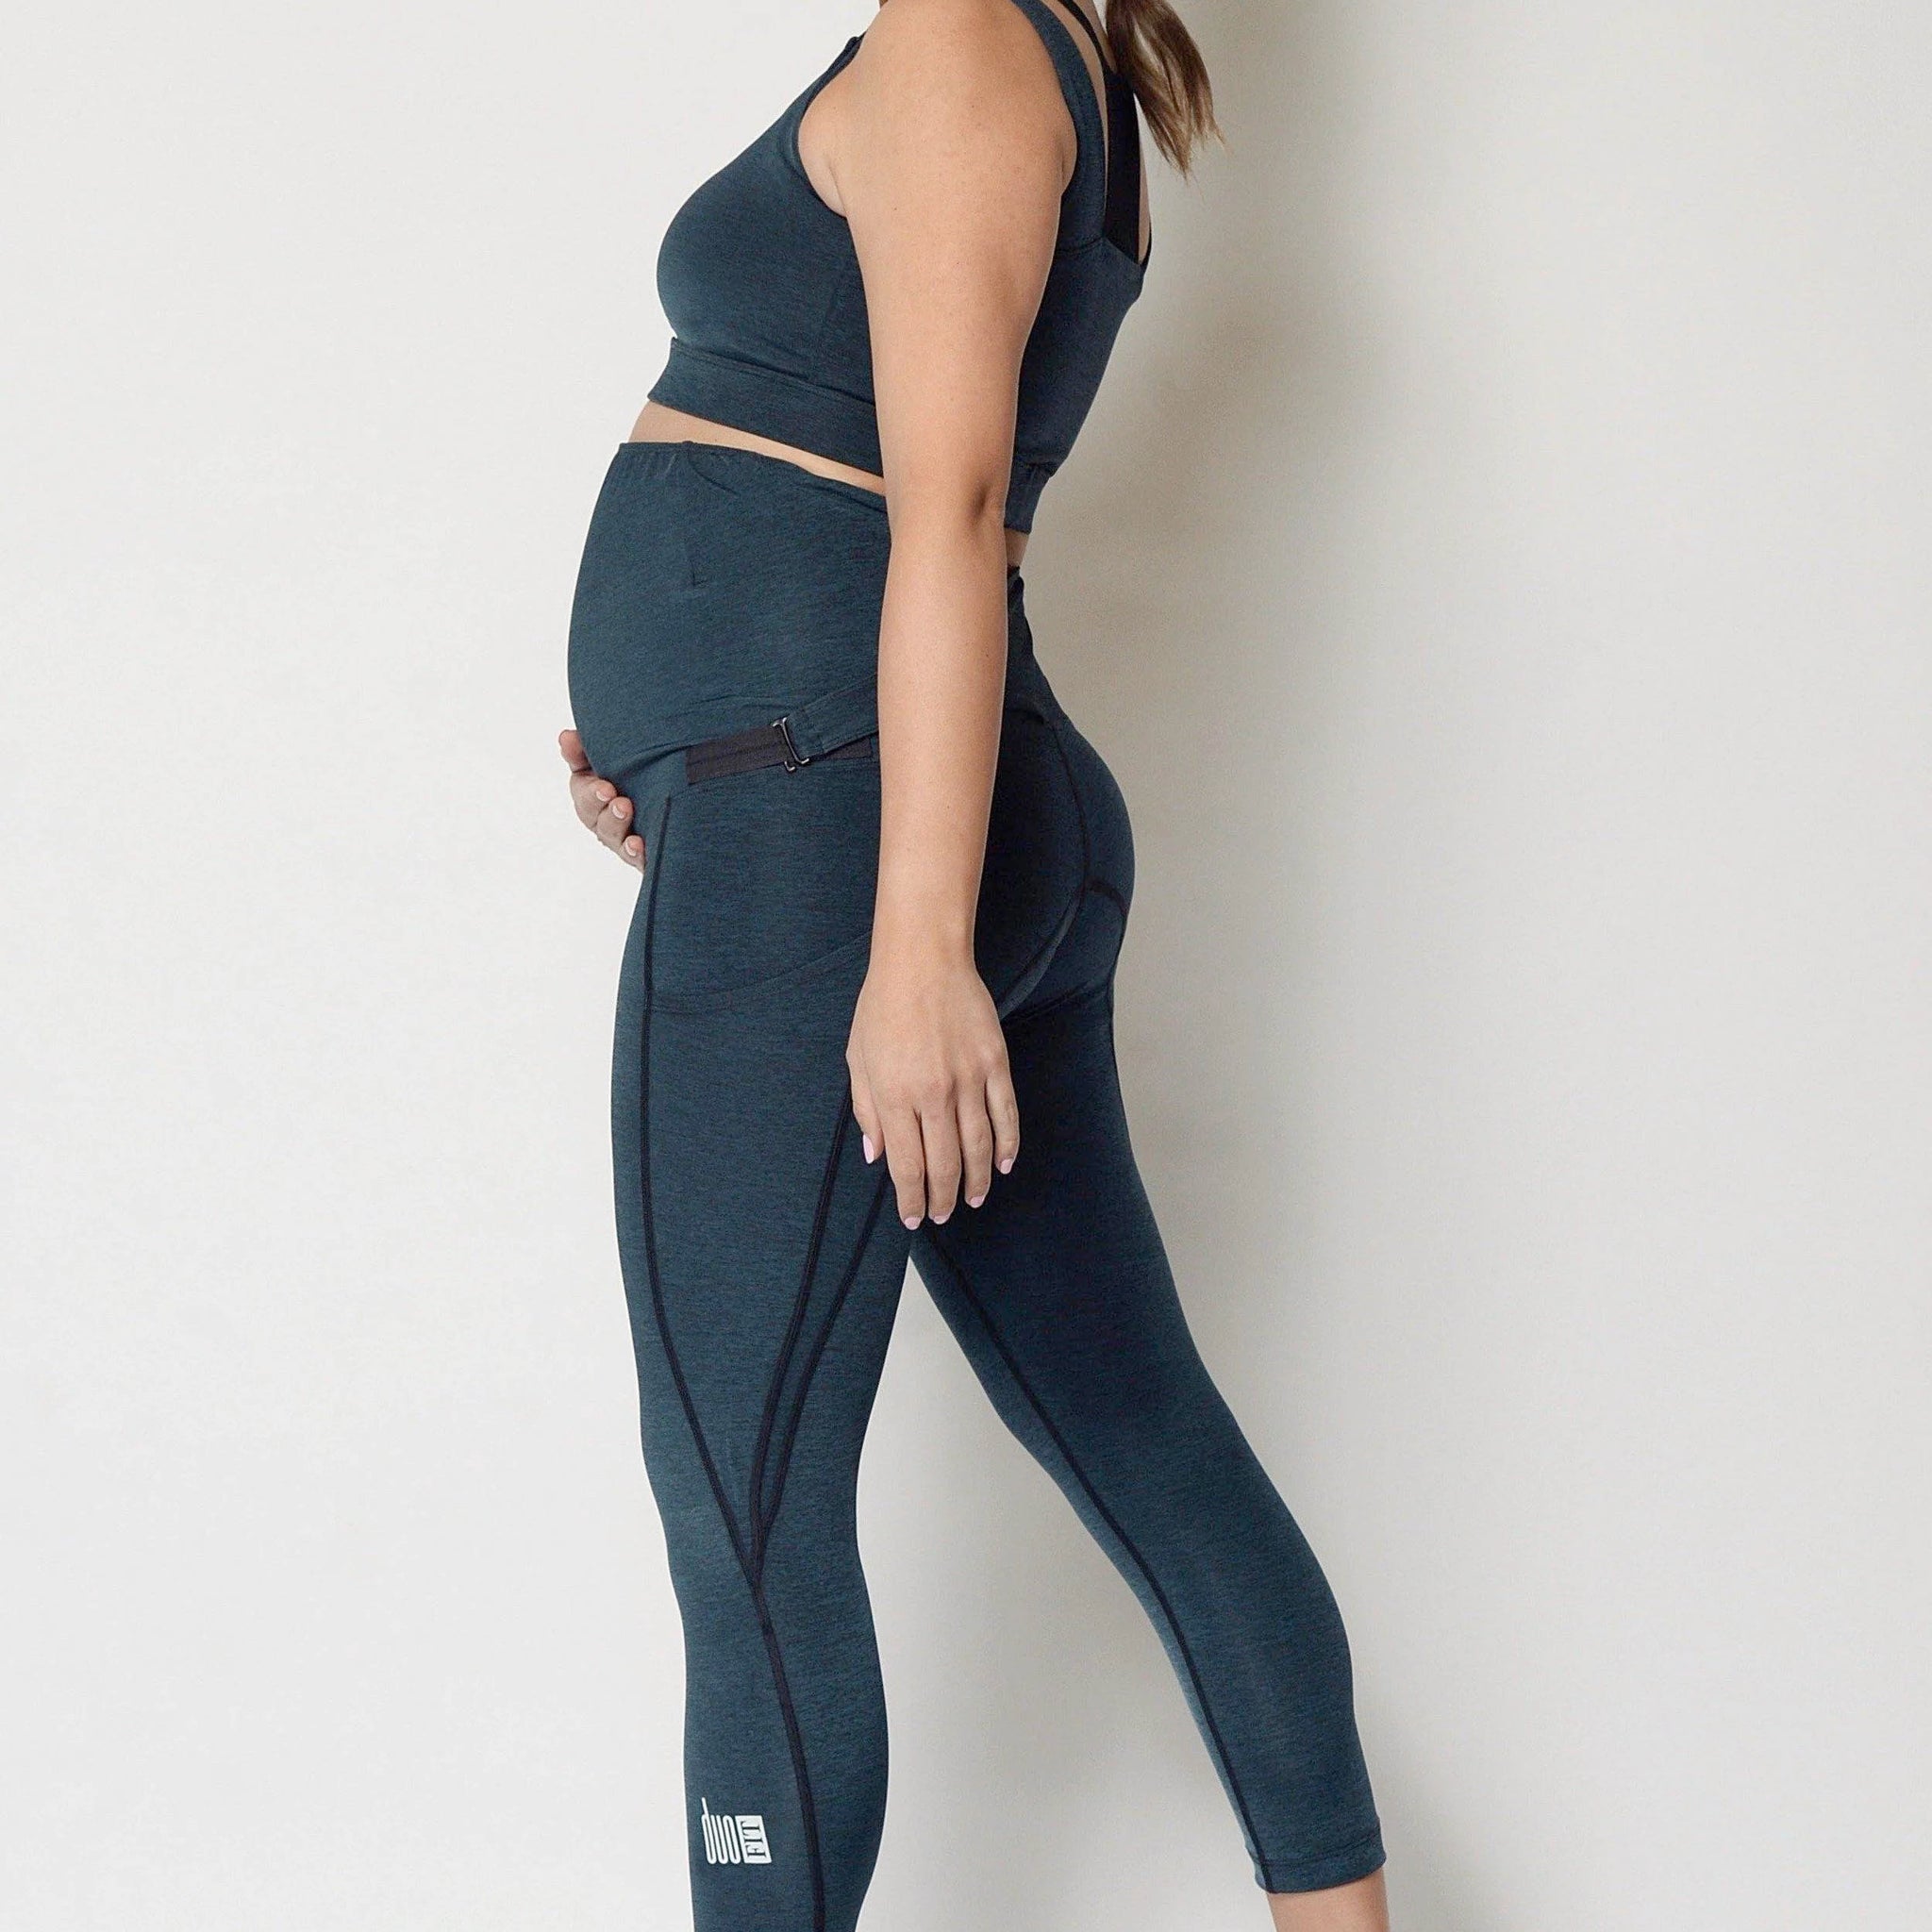 Chai Blue adjustable cropped maternity leggings, With A 10" Maternity Panel. Side pocket Will Fit All Phone Sizes, Anti-Chafing Seams.